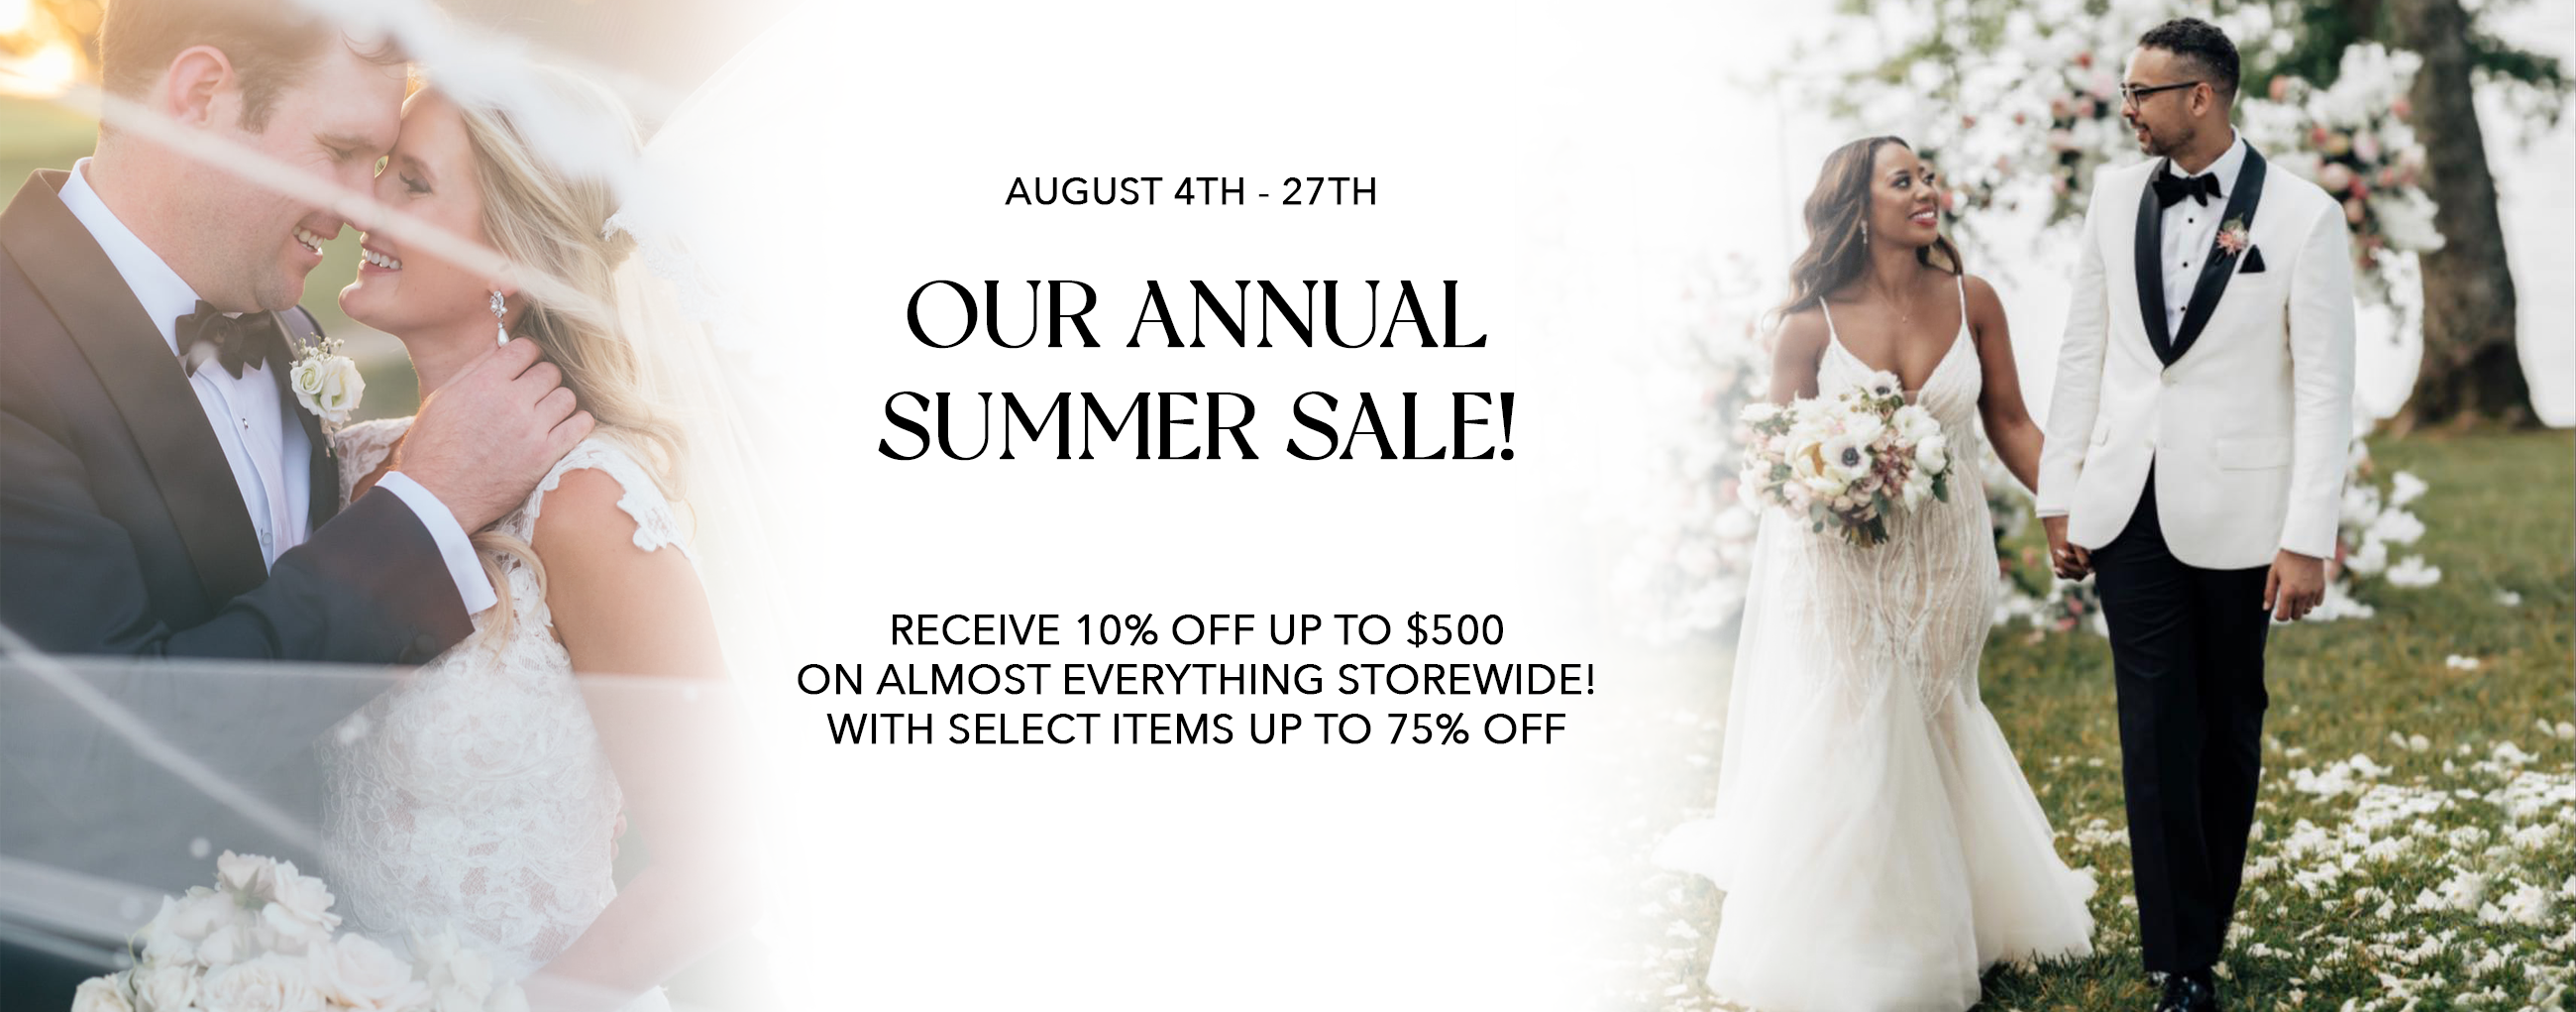 Our Annual Summer Sale